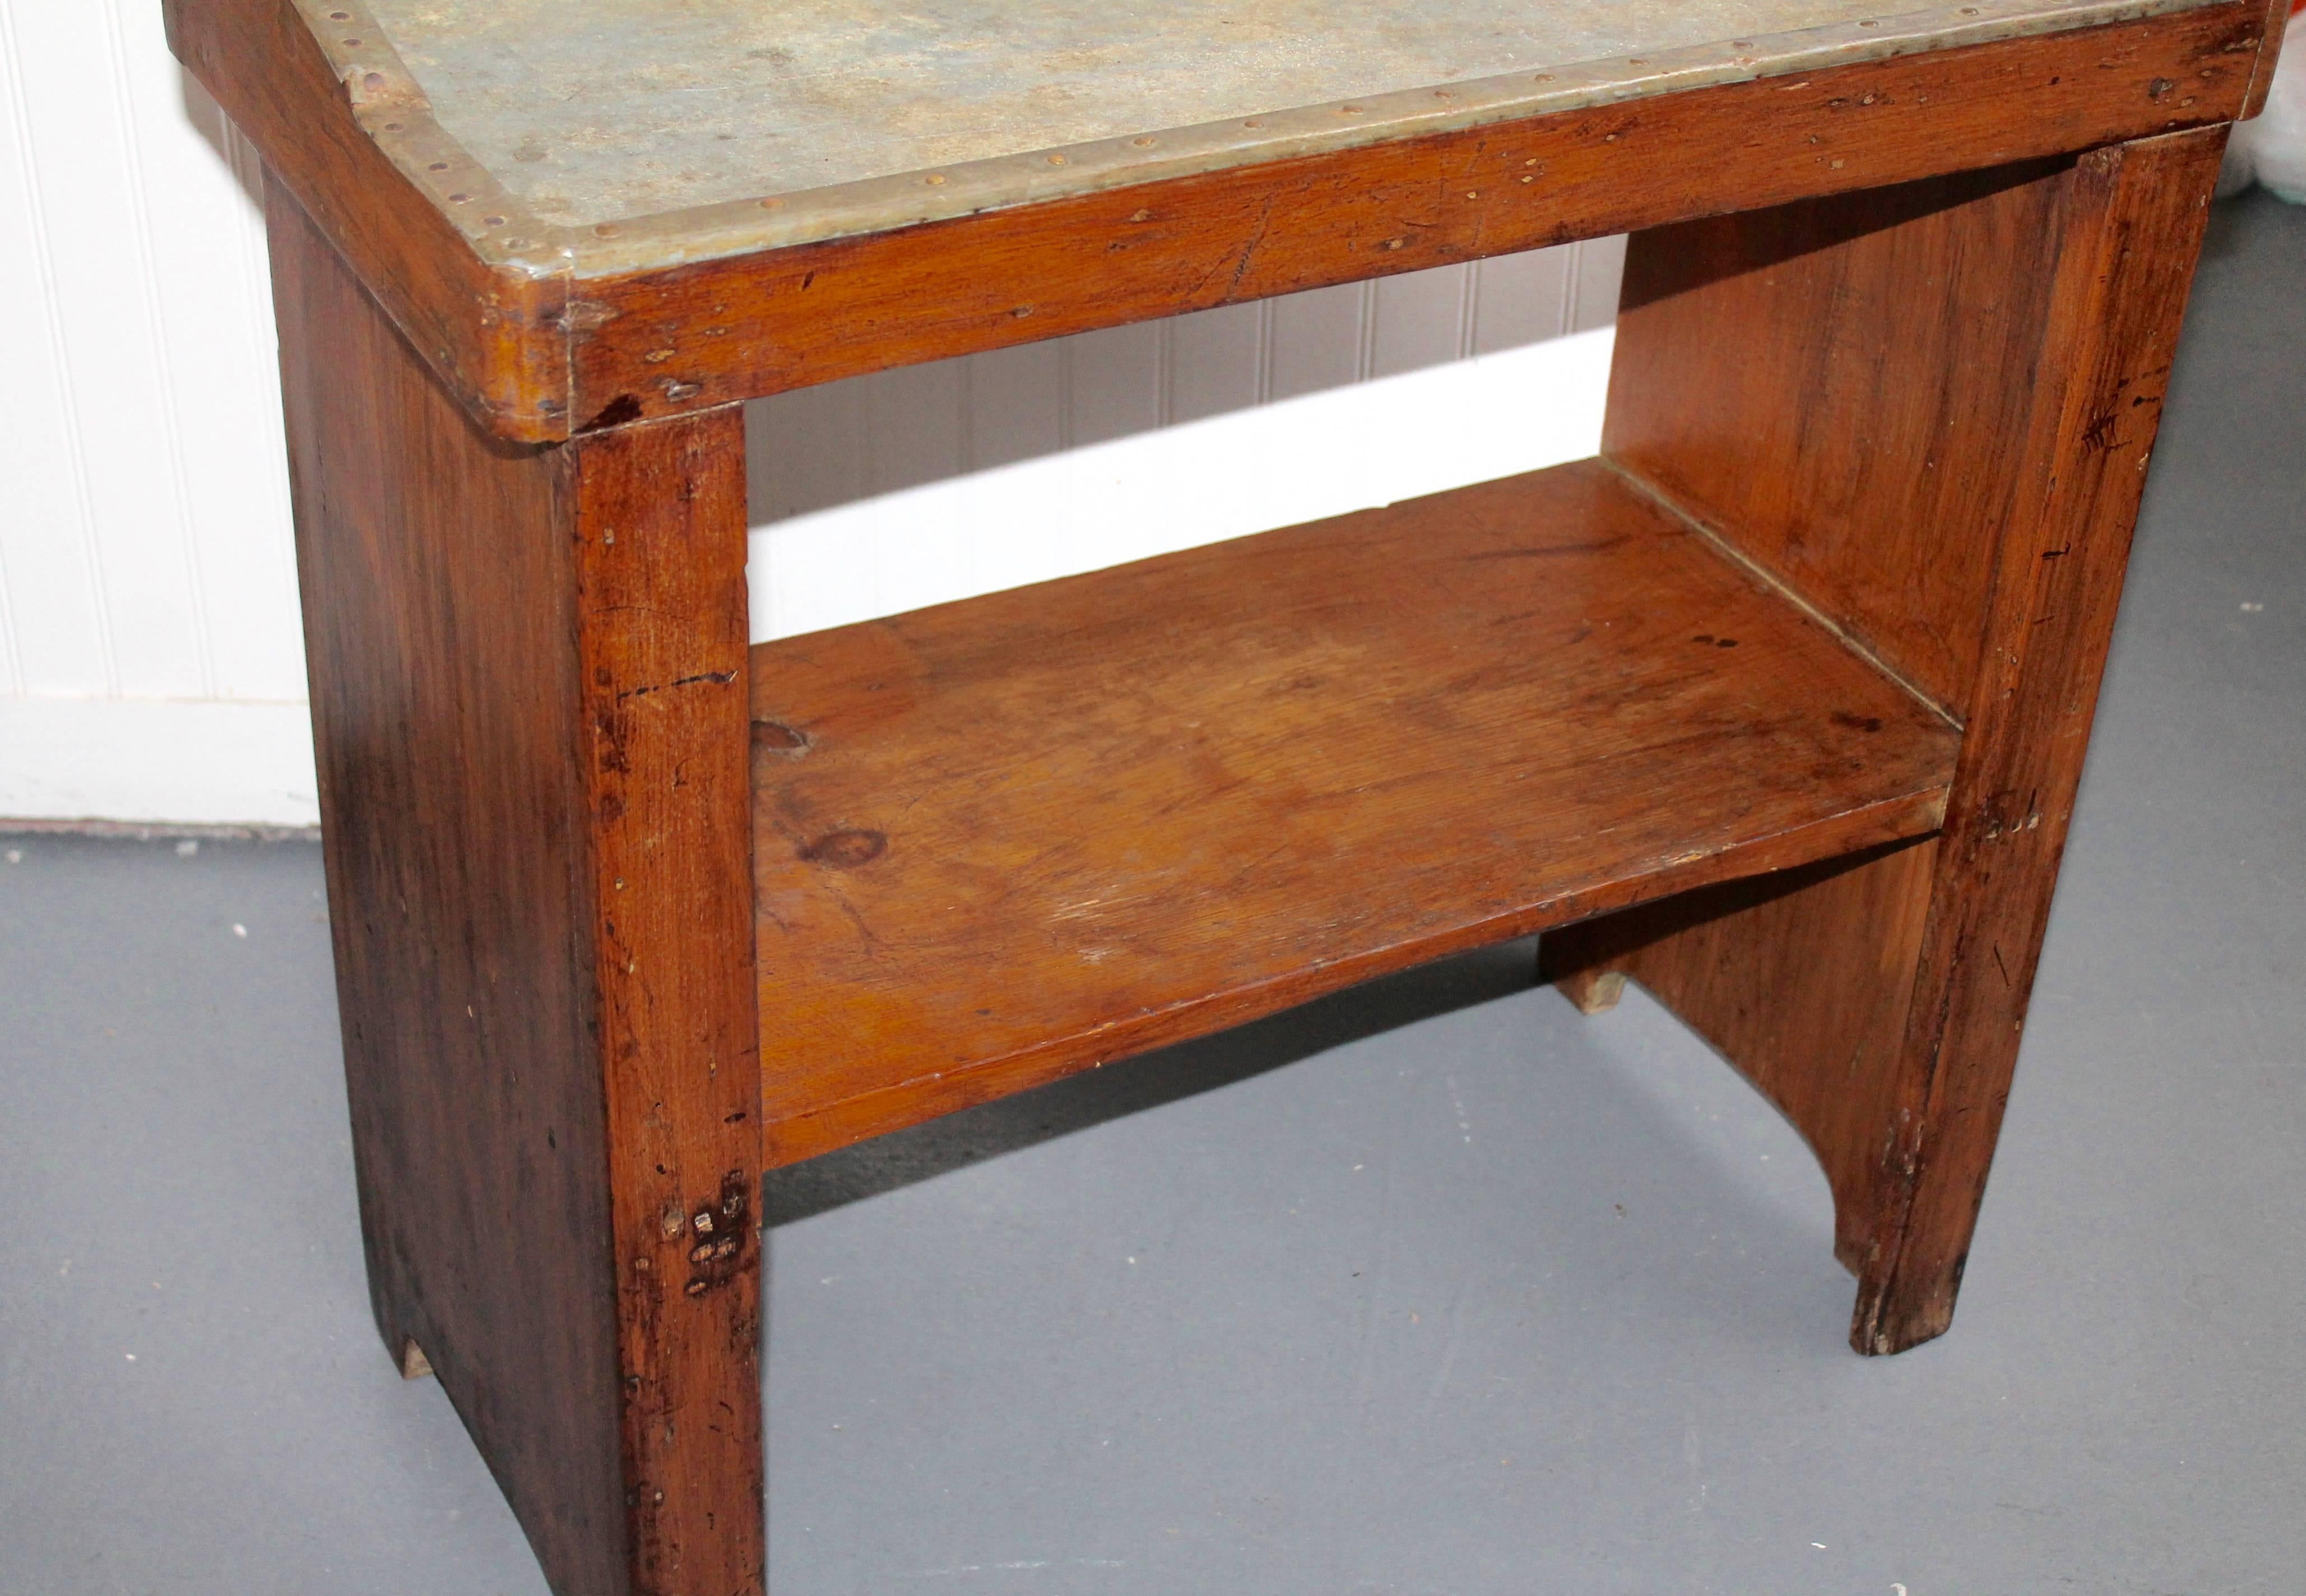 This early and very unusual dry sink or potting table was found in Pennsylvania and is in nice, sturdy condition. Makes a great side table. Looks like a miniature bucket bench.